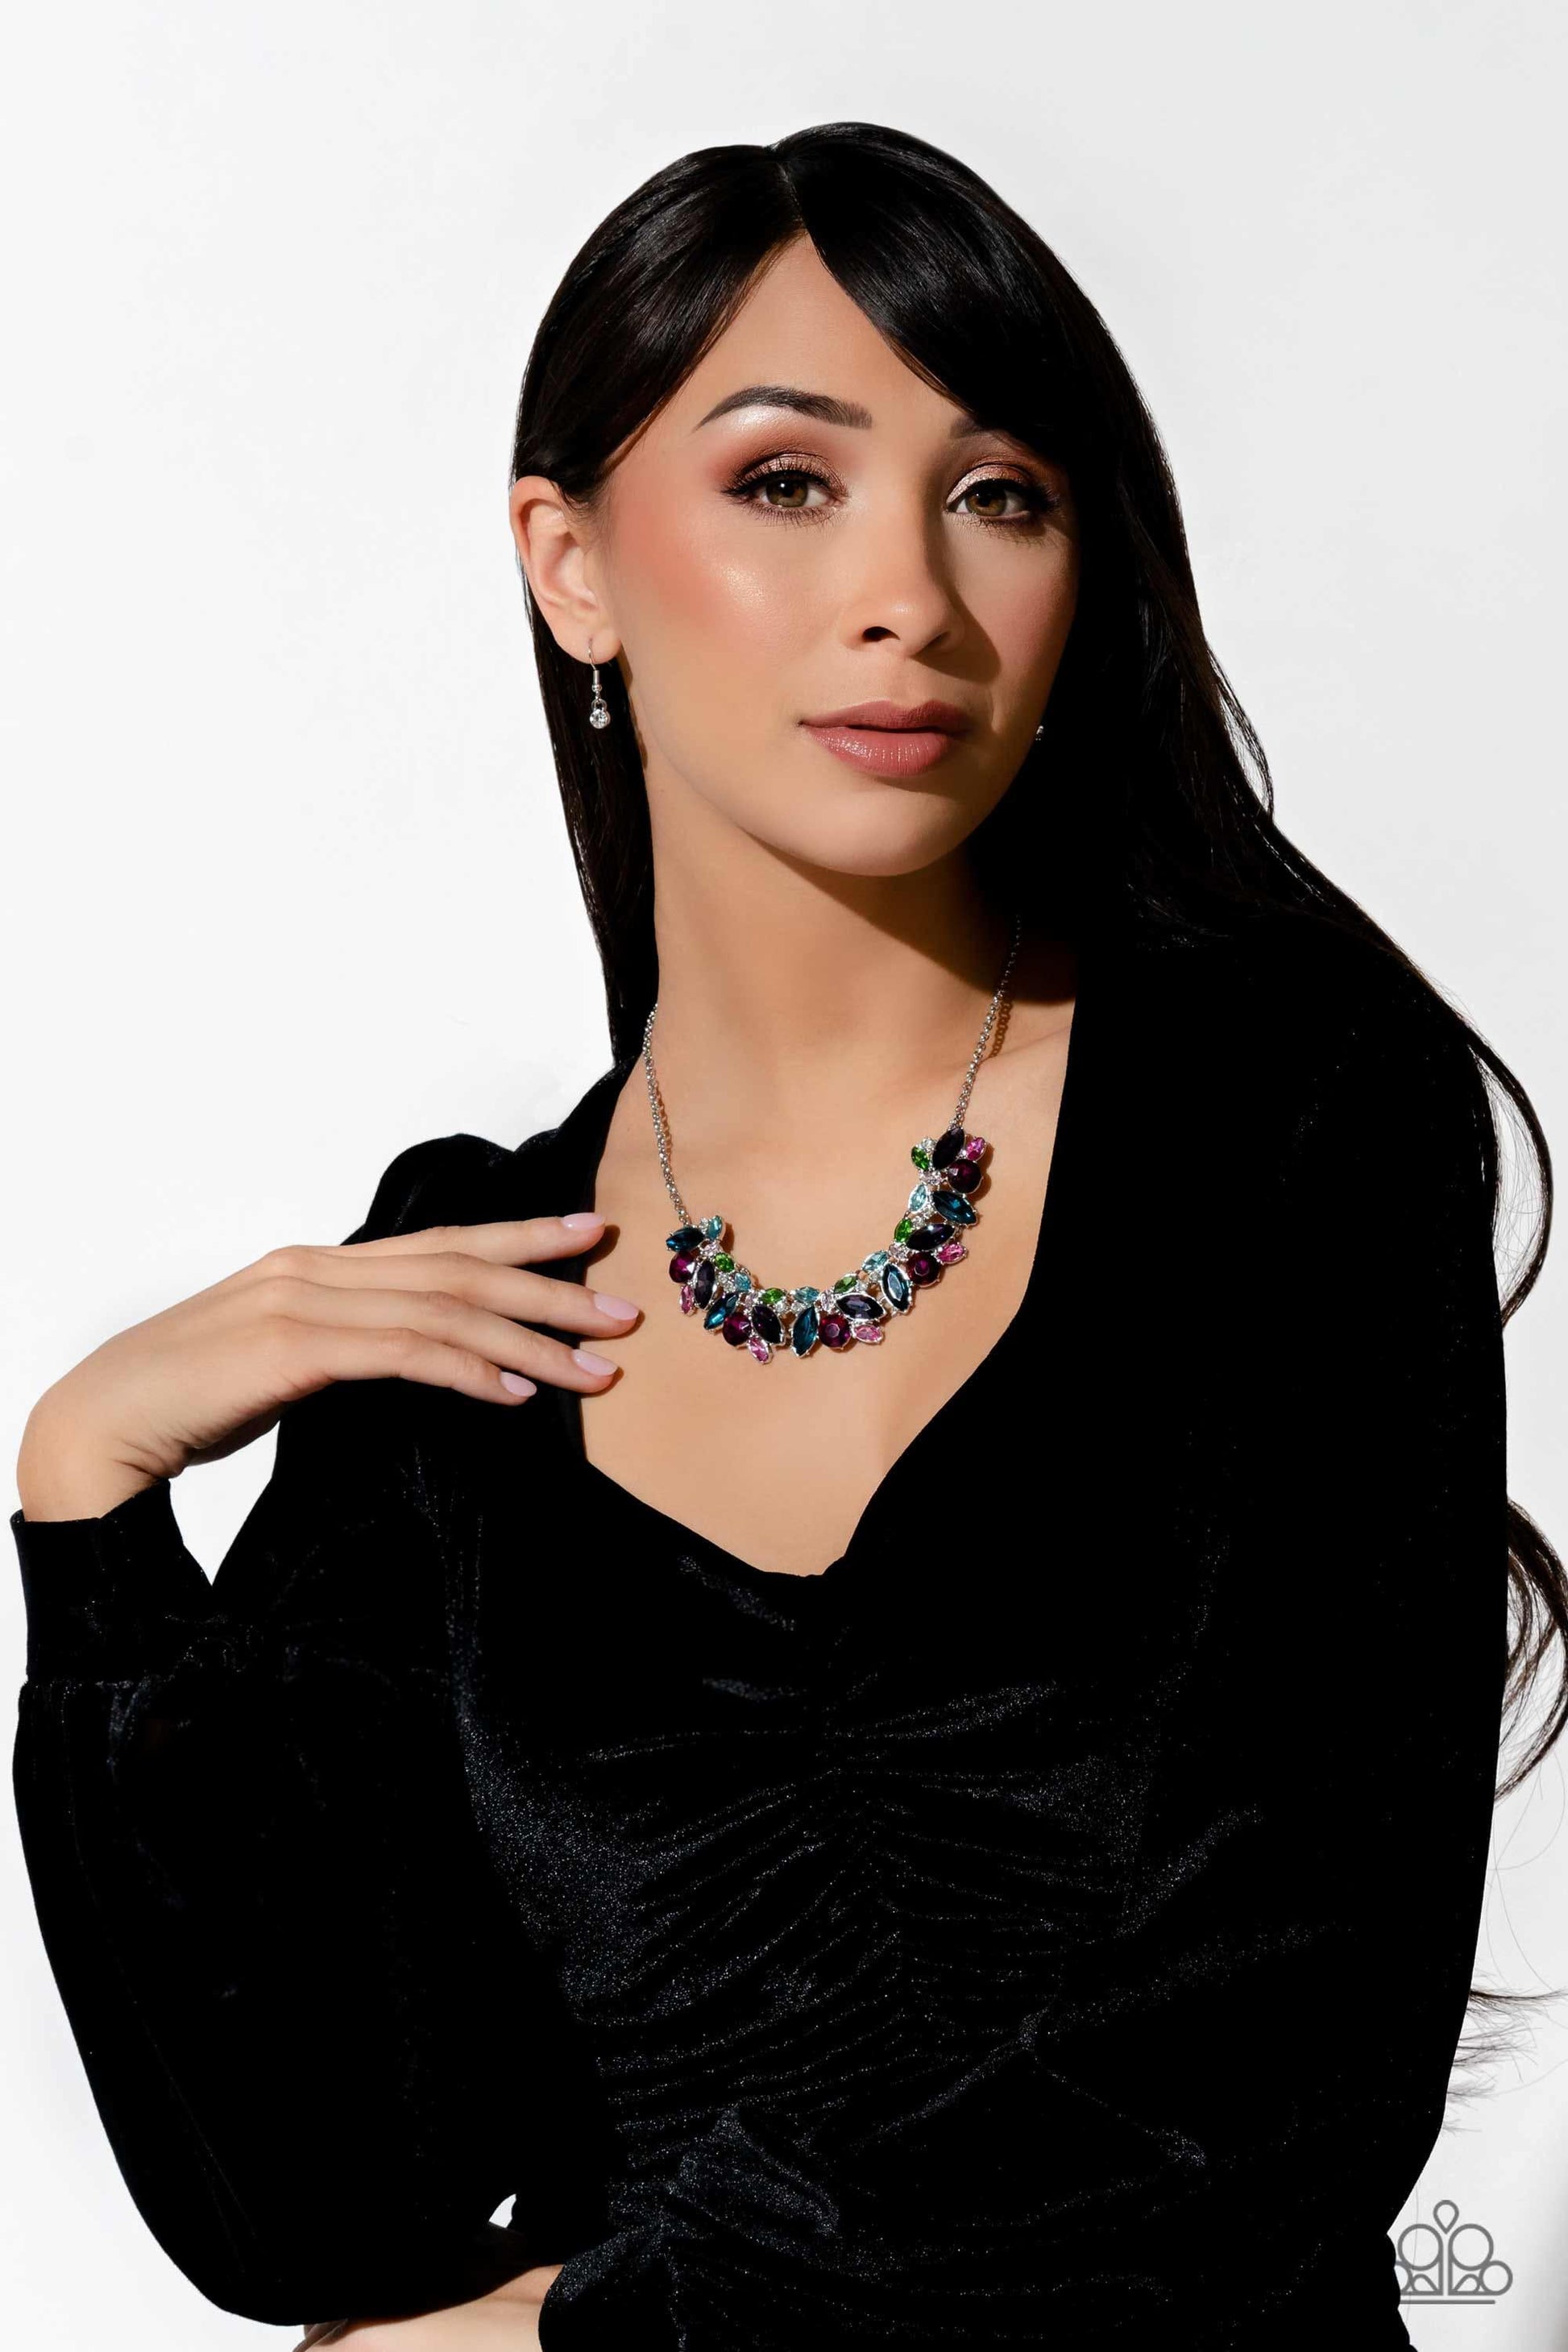 Paparazzi Accessories - Crowning Collection - Multicolor Necklace - Bling by JessieK